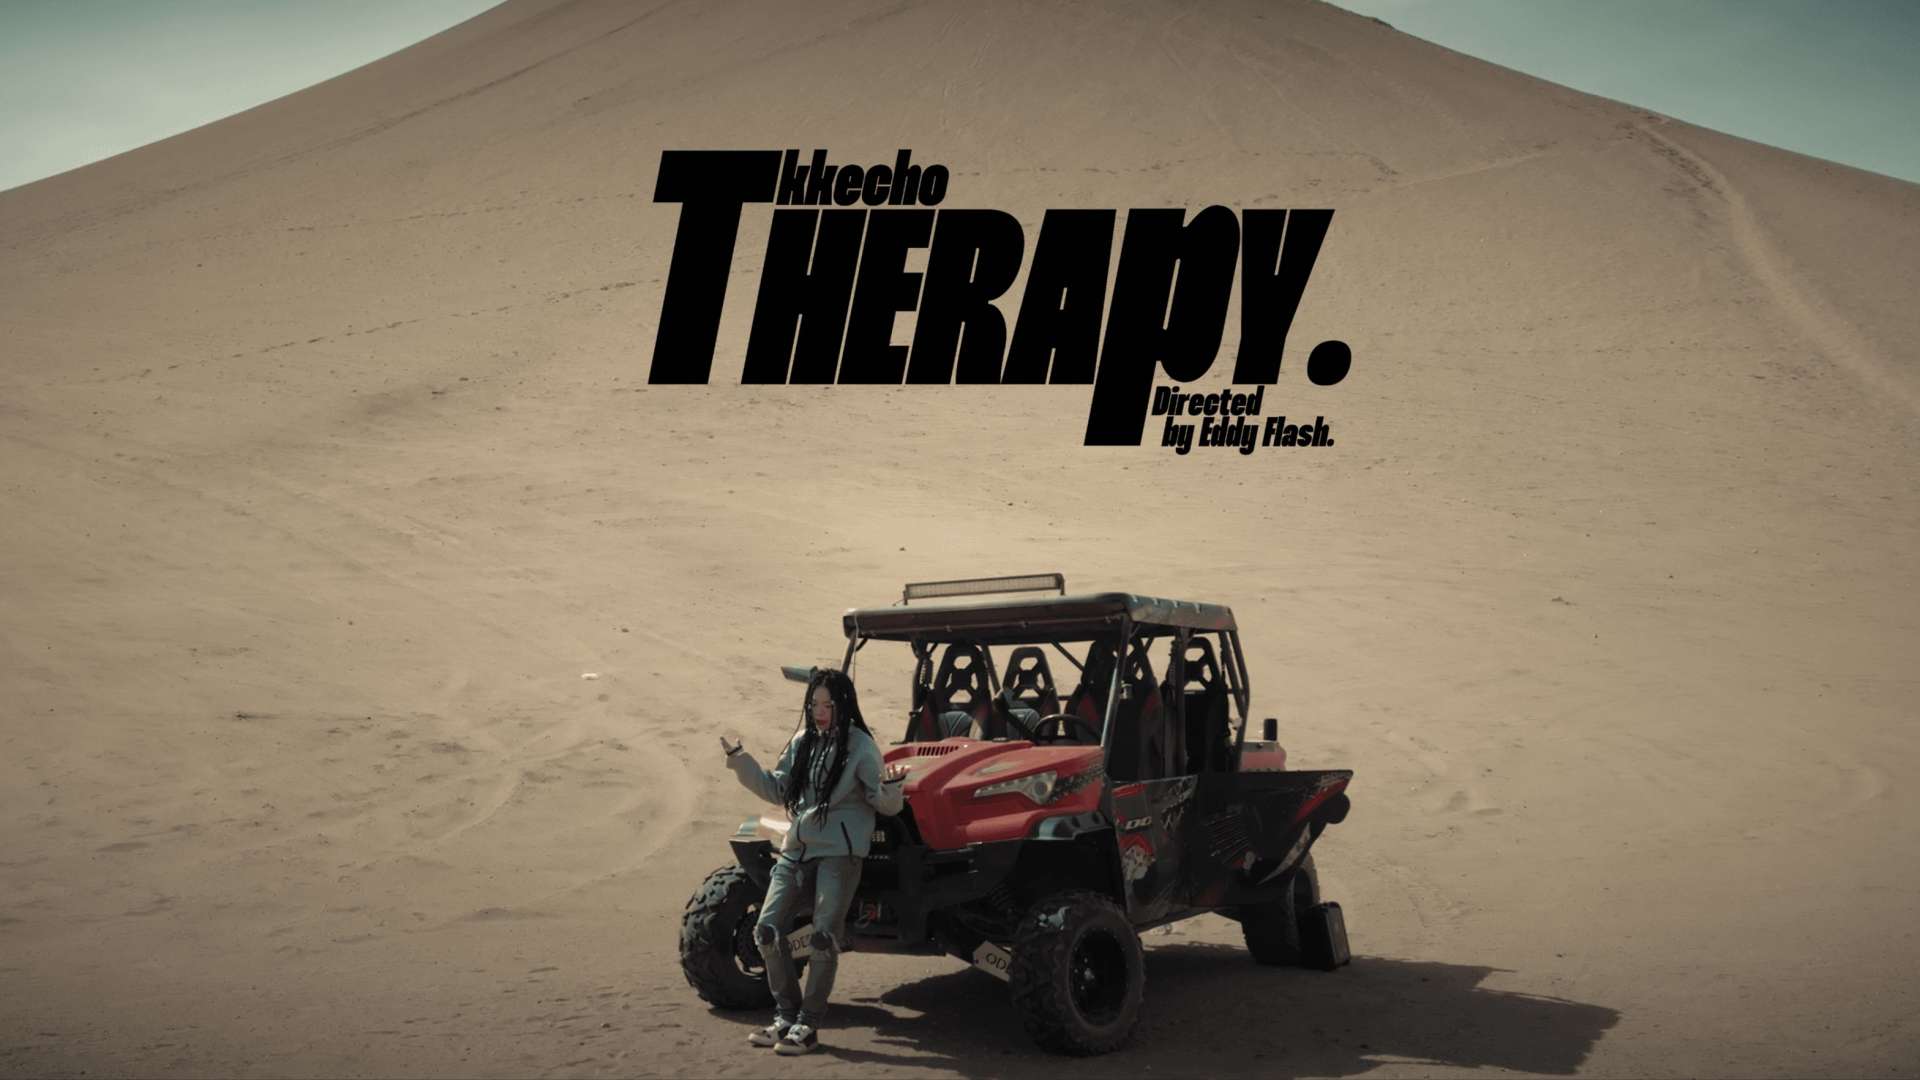 THERAPY(Official Music Video)